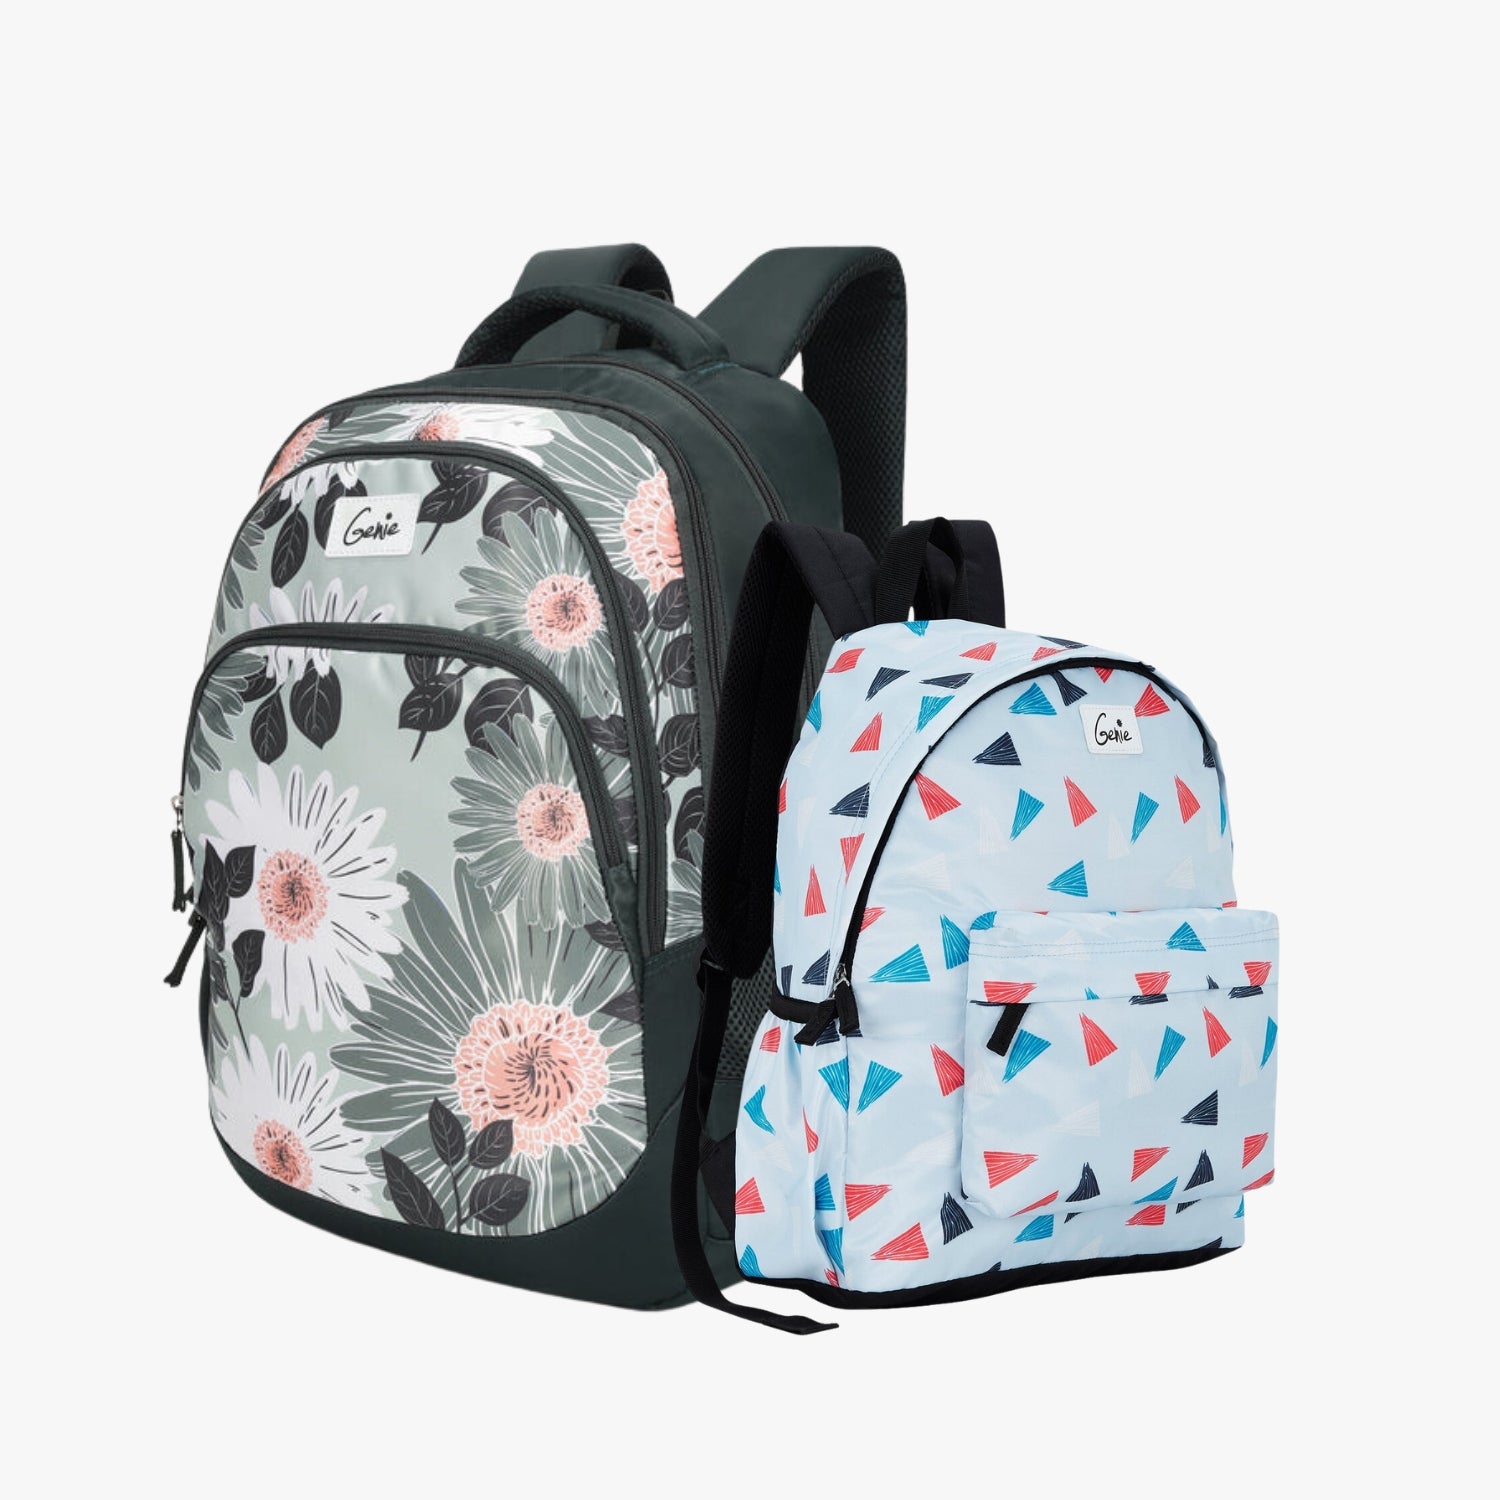 Genie School Backpack and Casual Backpack Combo